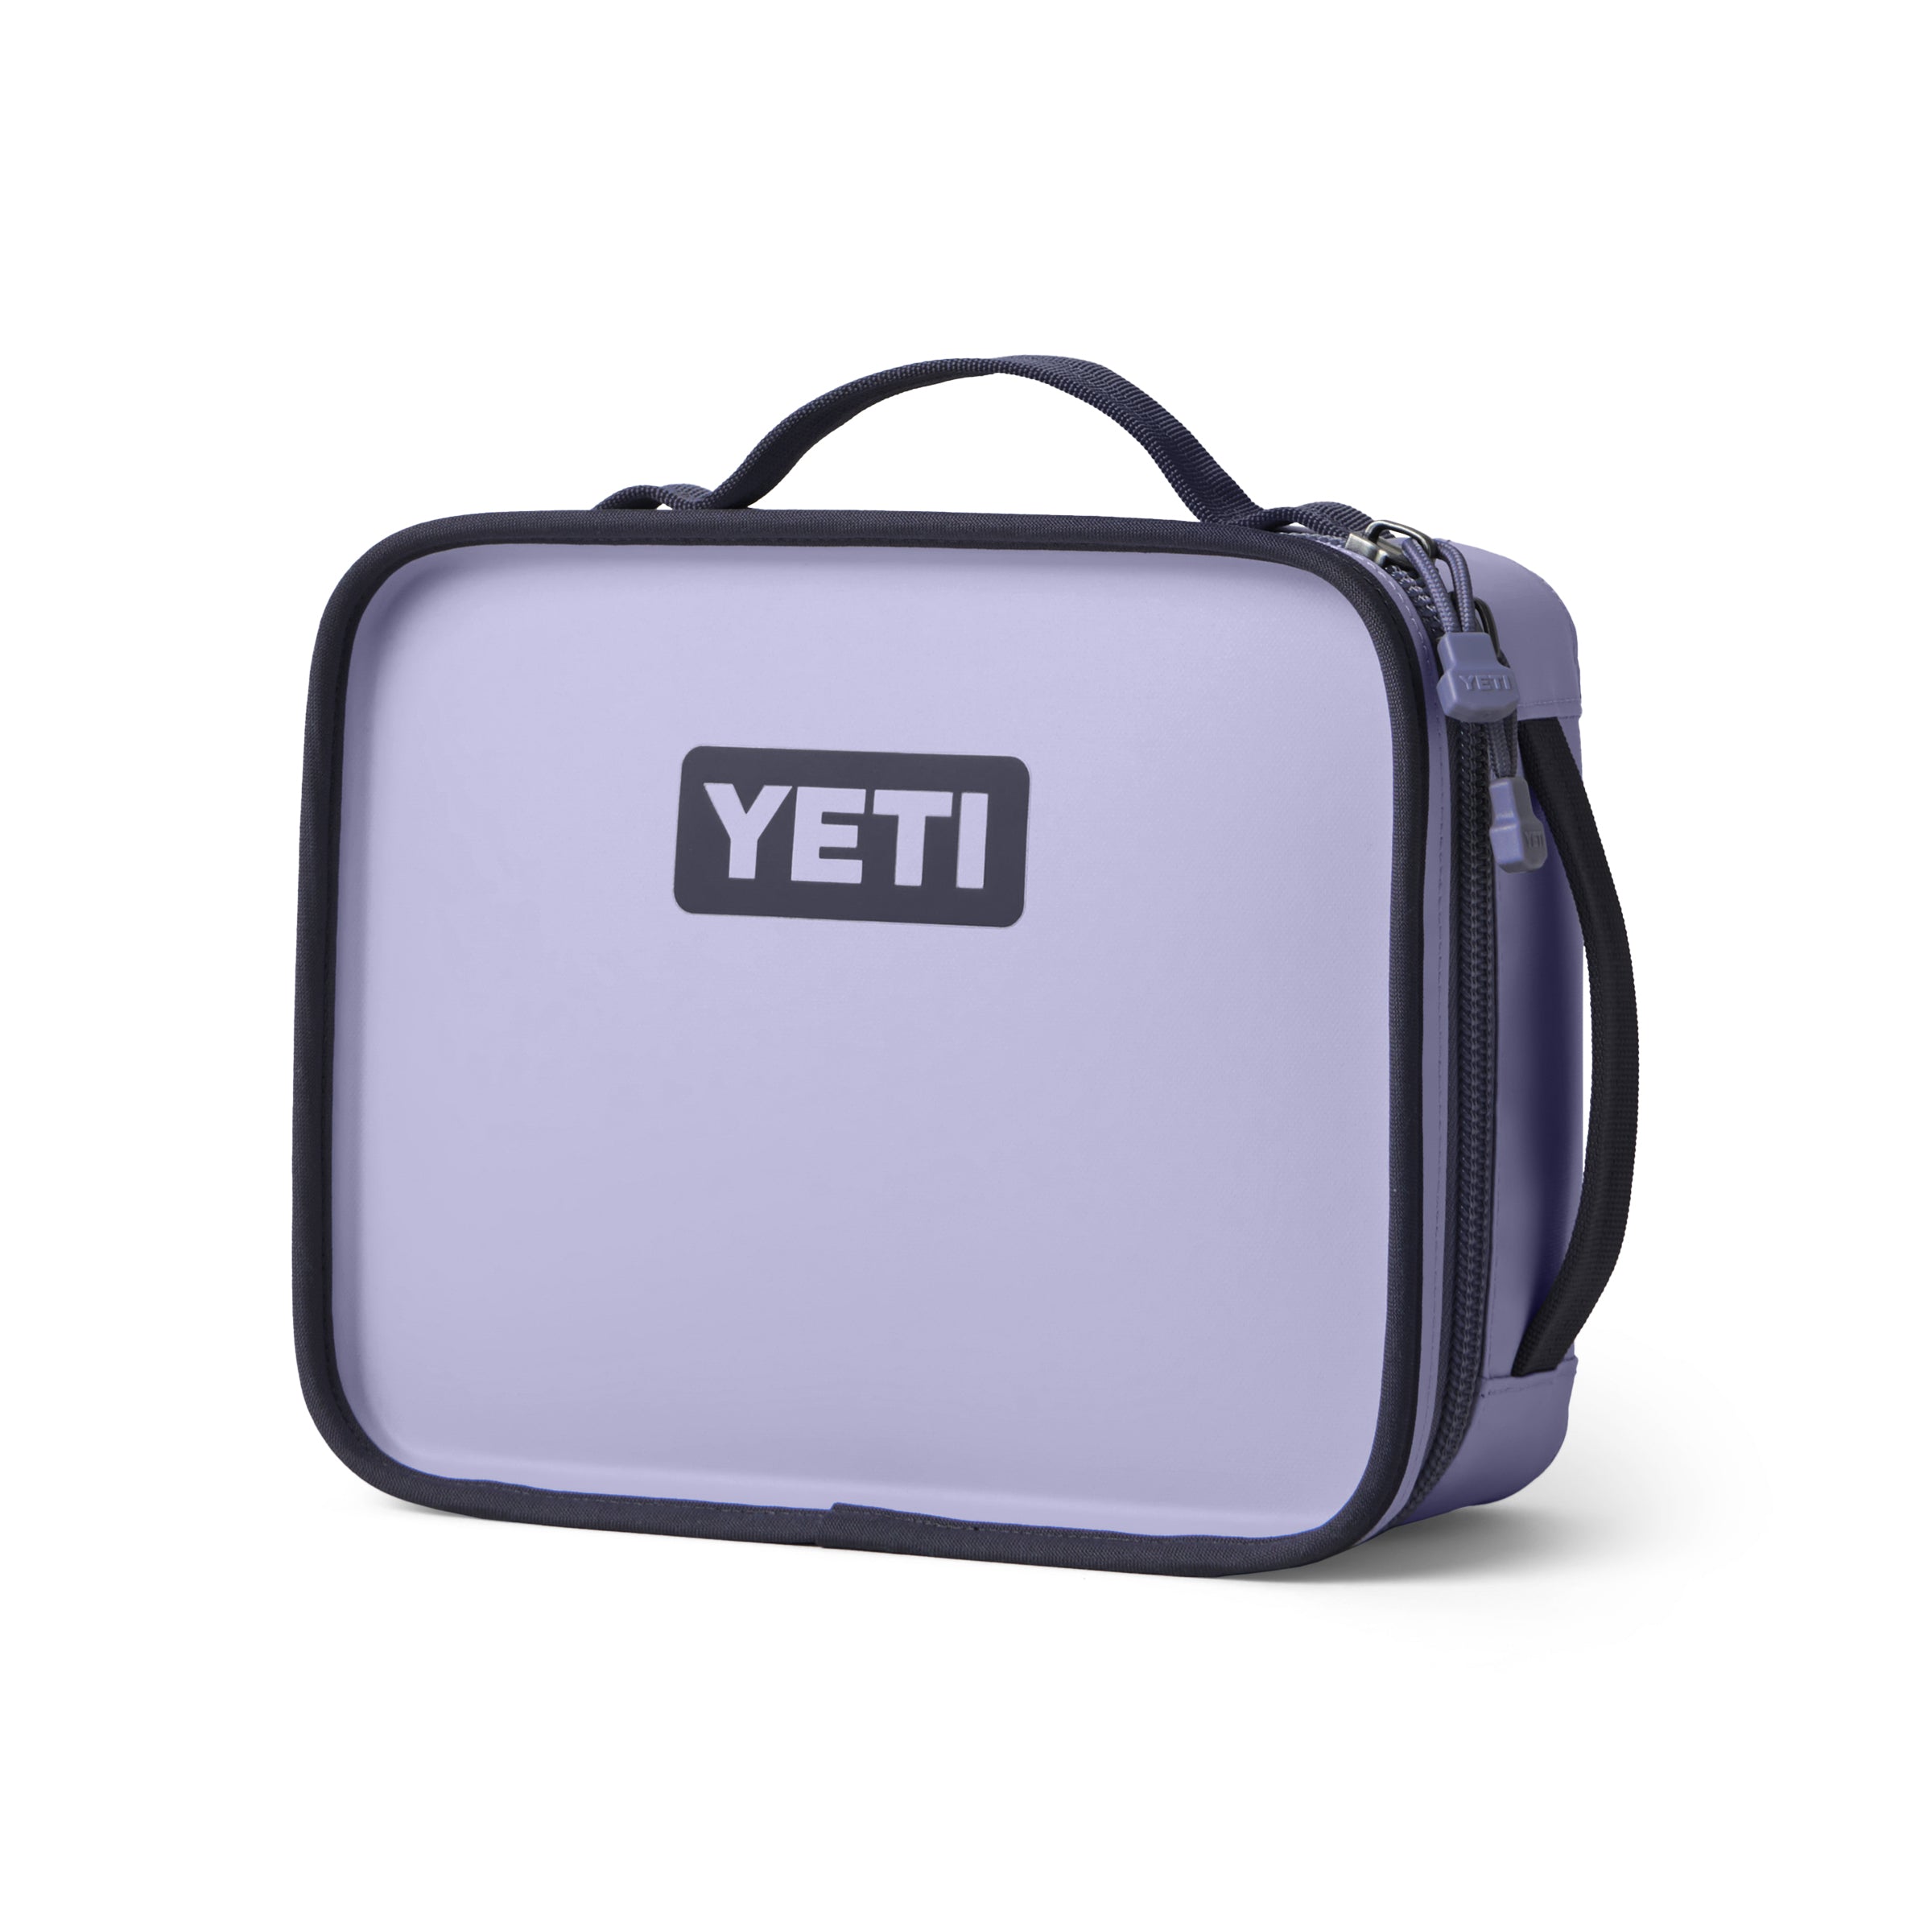 Yeti Daytrip Lunch Bag and Yeti Ice Unboxing and Overview 